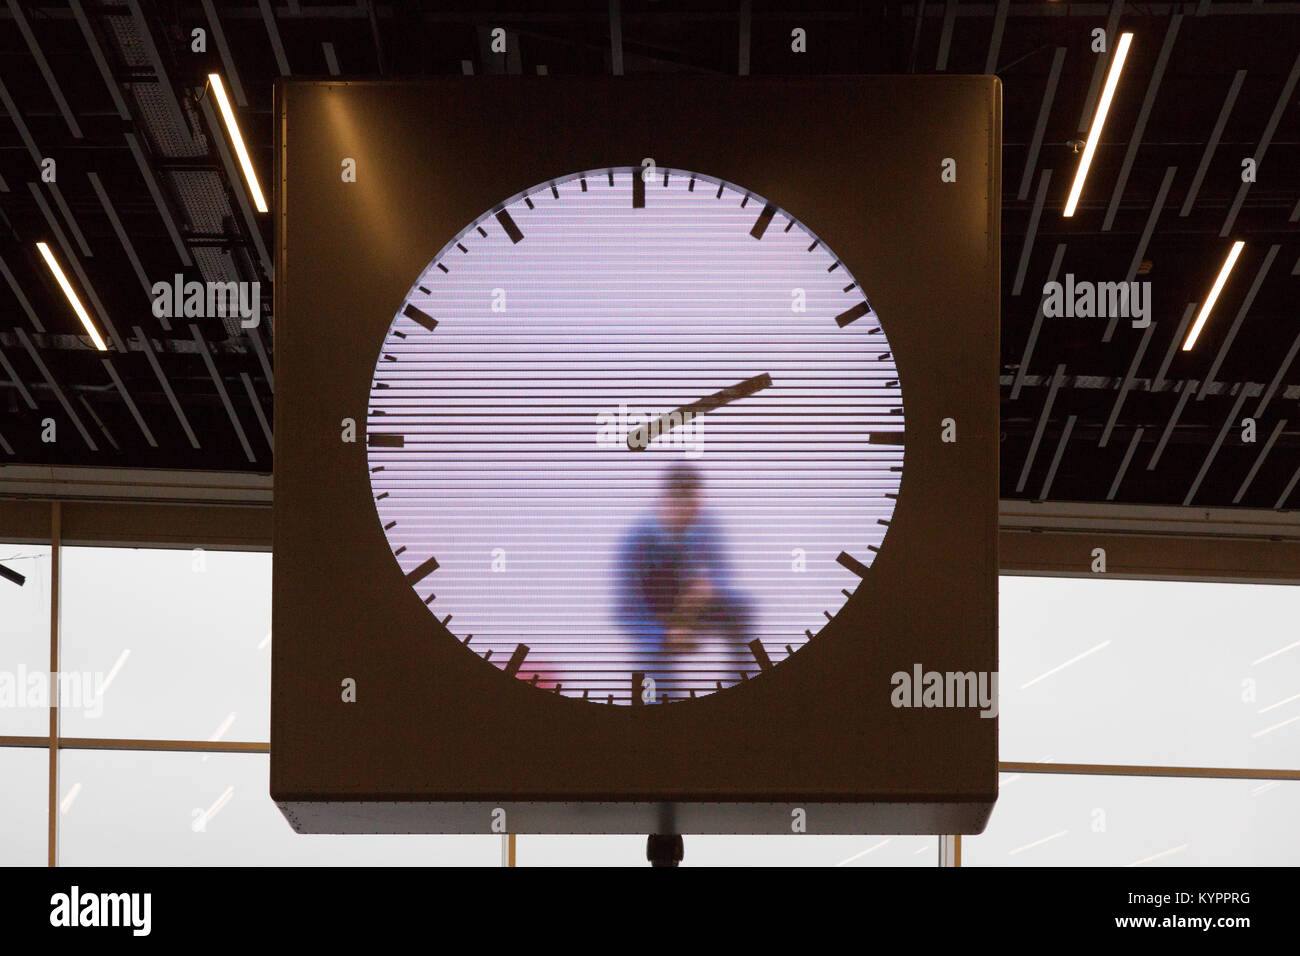 Schiphol airport clock hi-res stock photography and - Alamy